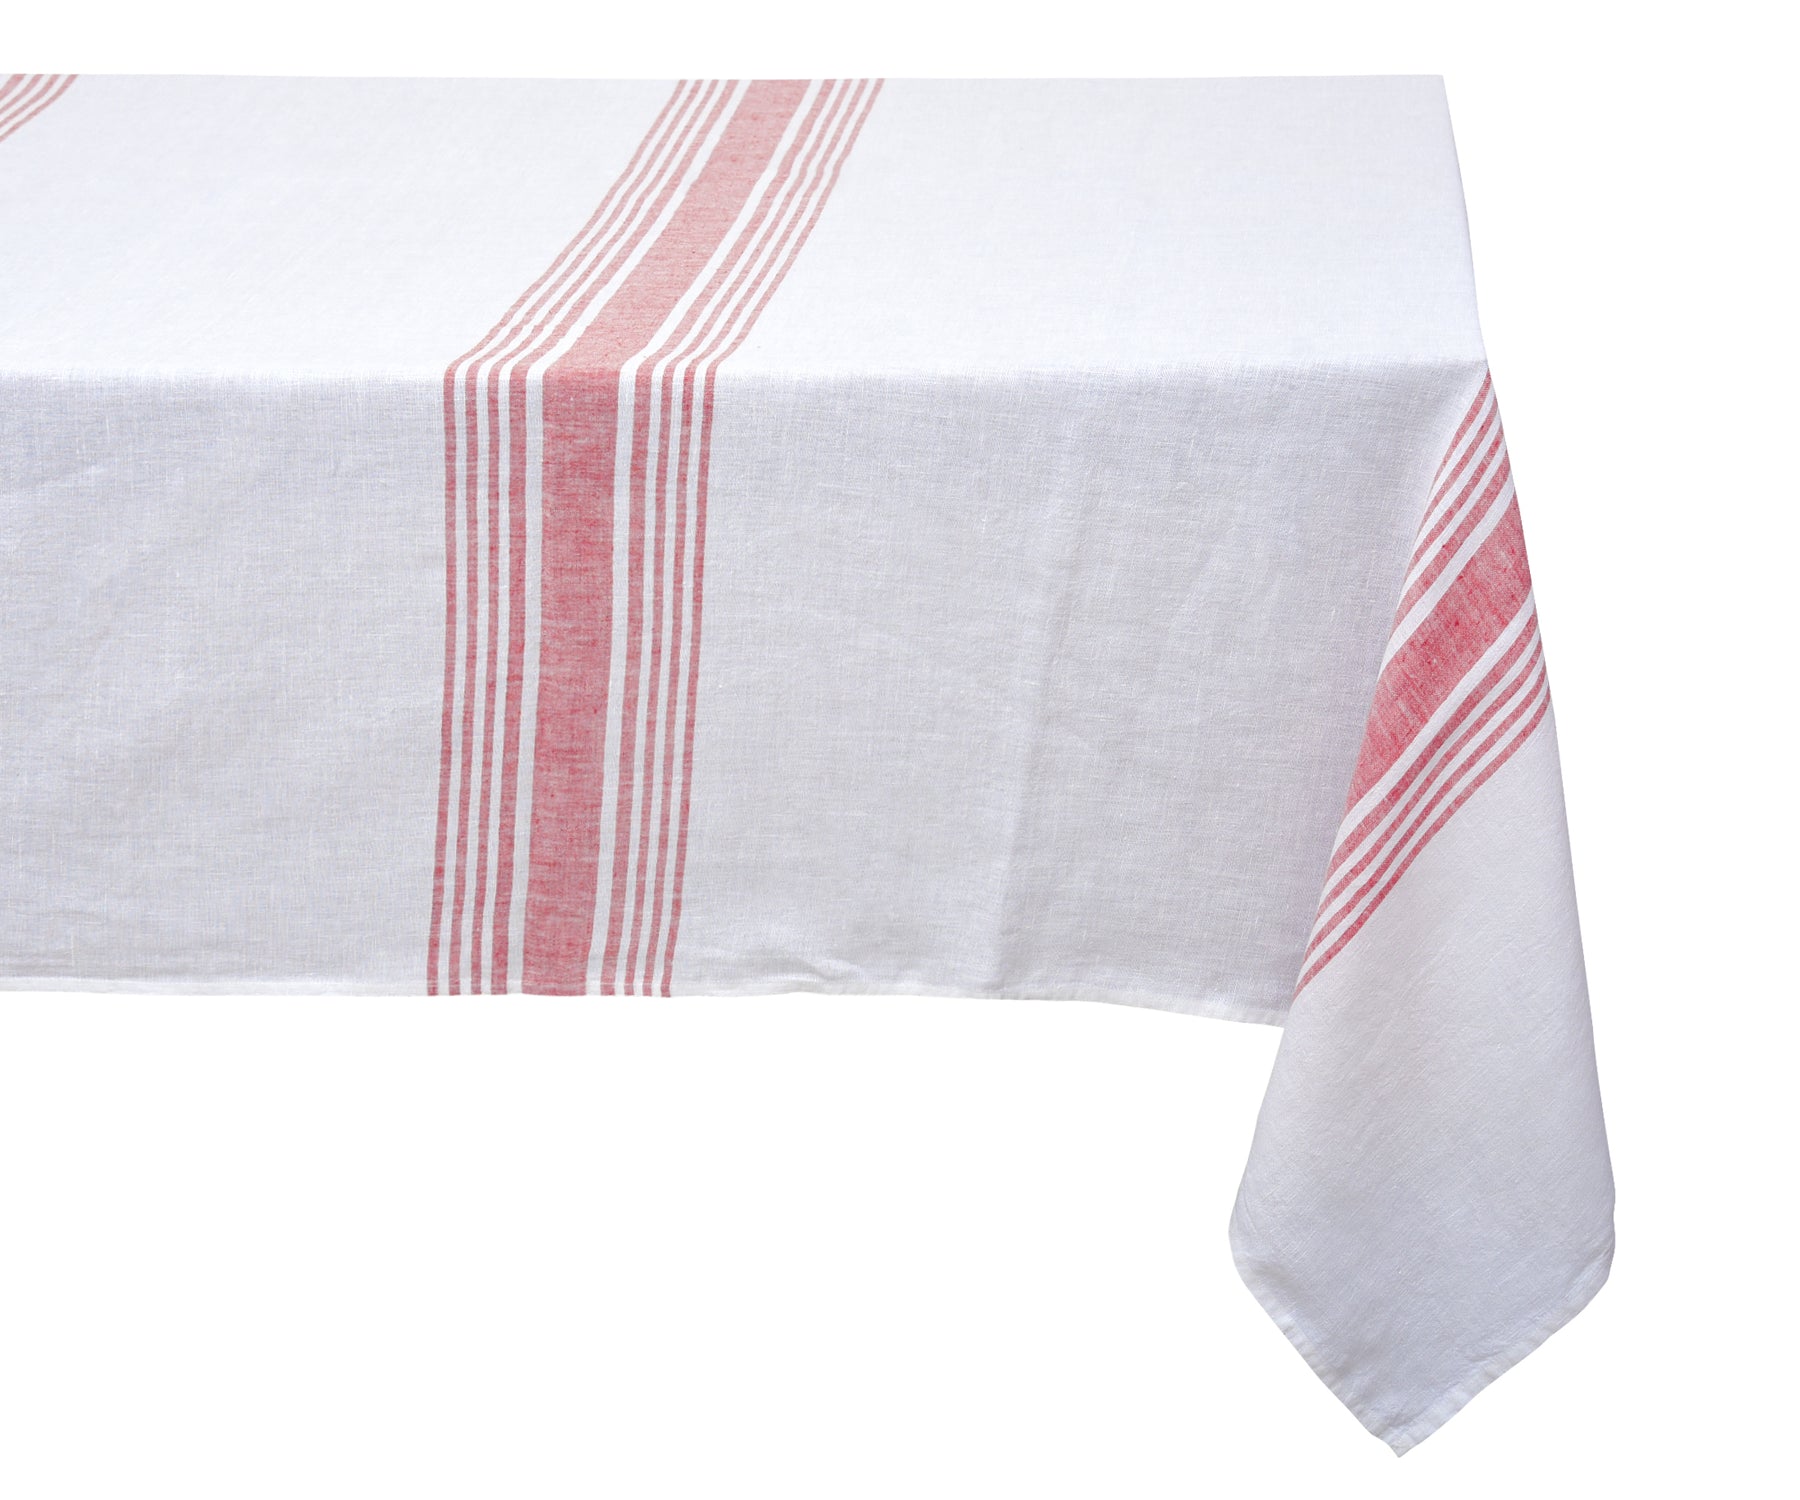 Linen Tablecloth Table Strip Napkins Runners Pink 